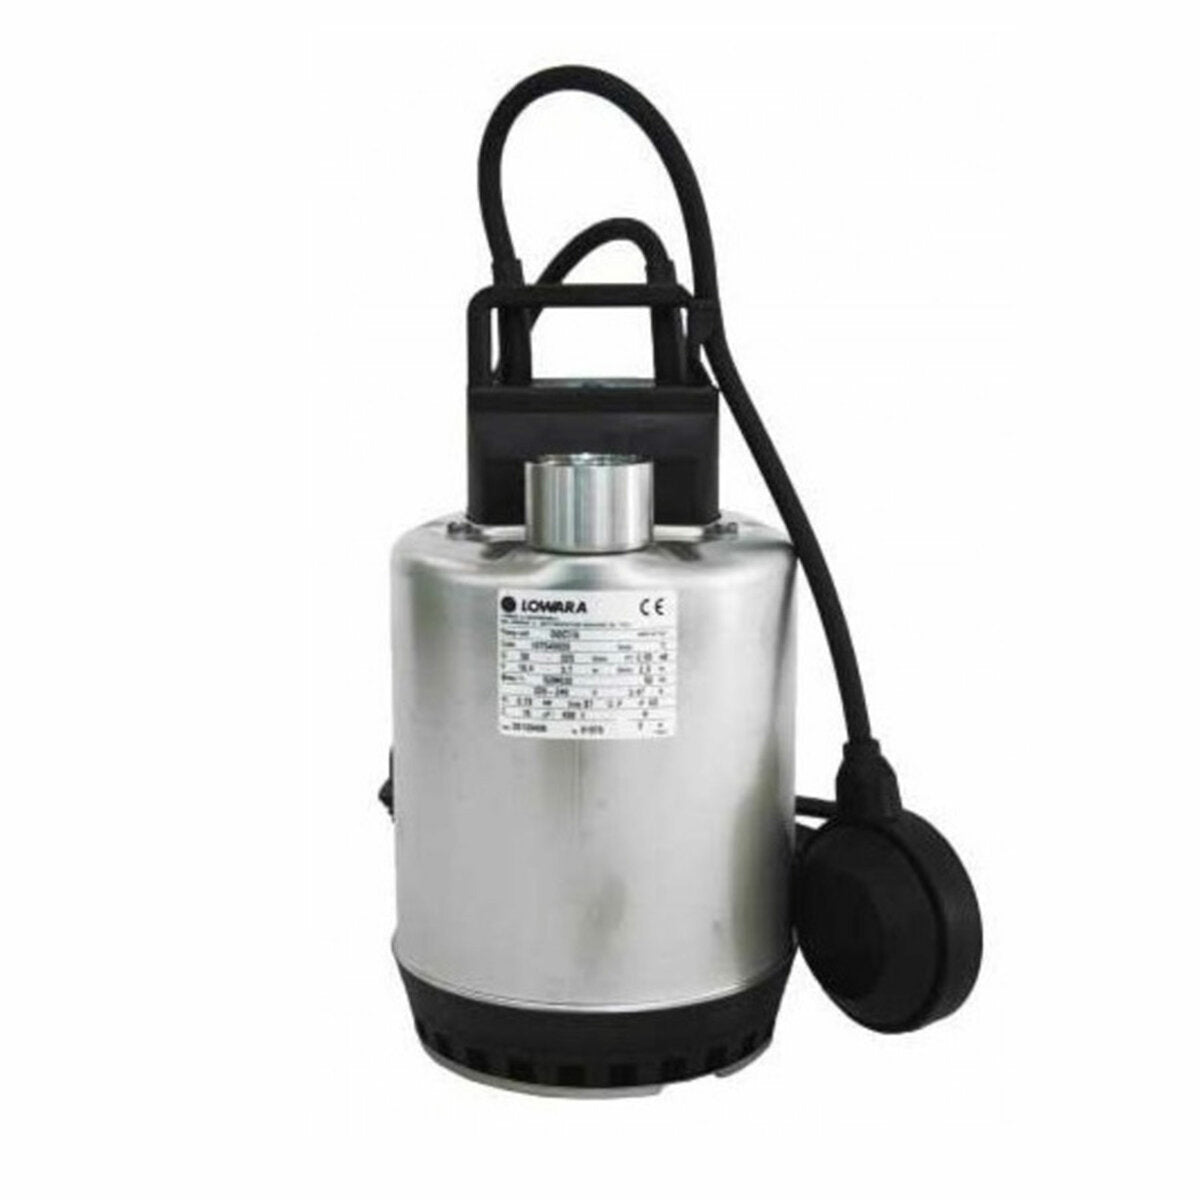 Lowara-Xylem submersible pump single-phase clear water hp 0.75 kW 0.55 Doc7 / a series